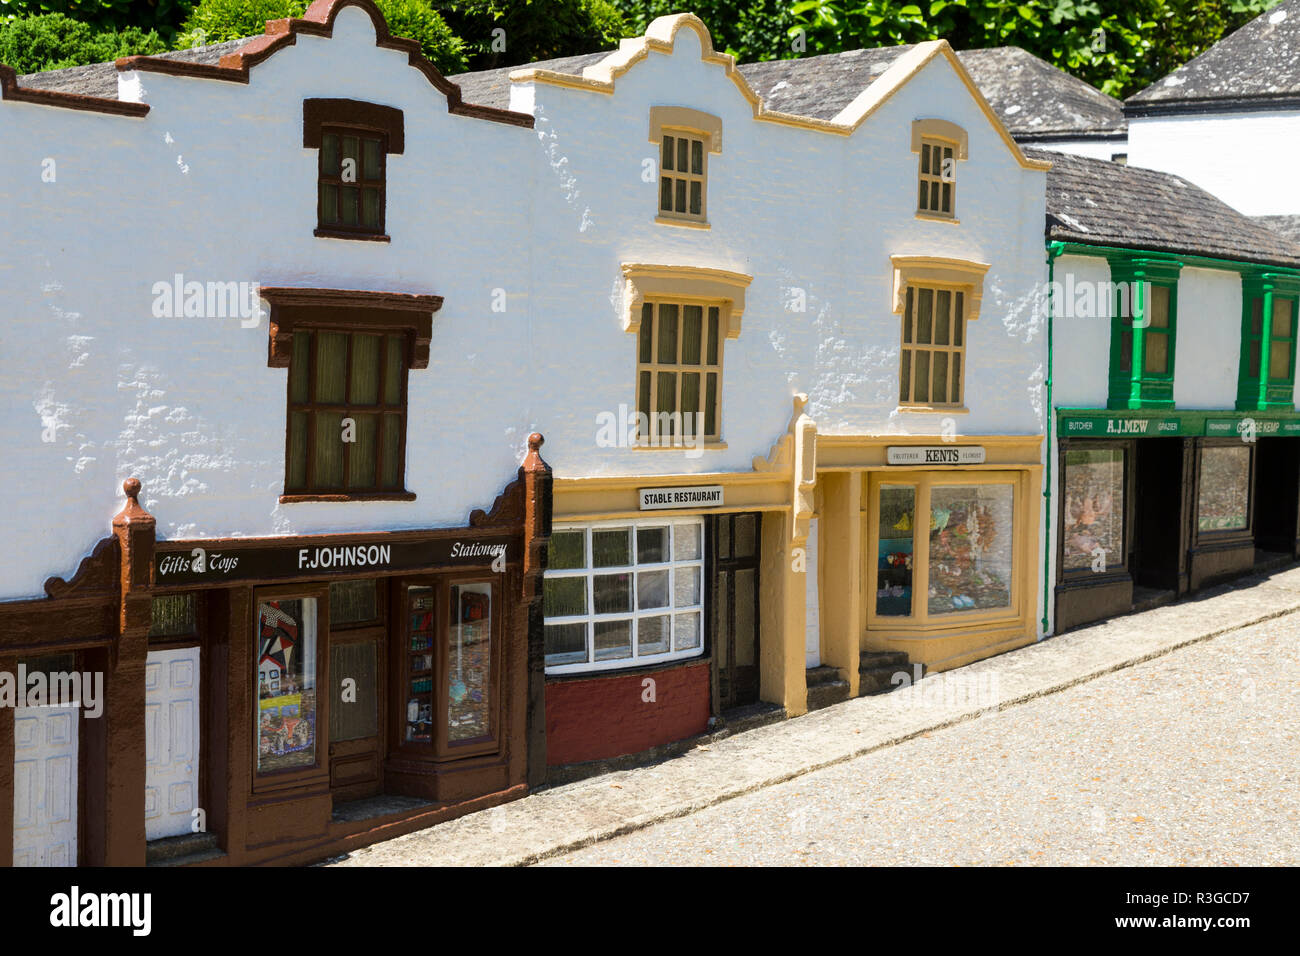 A terrace / terraced row of miniature shop buildings including shops and houses inside the Model Village. Godshill, Ventnor, Isle of Wight UK (98) Stock Photo